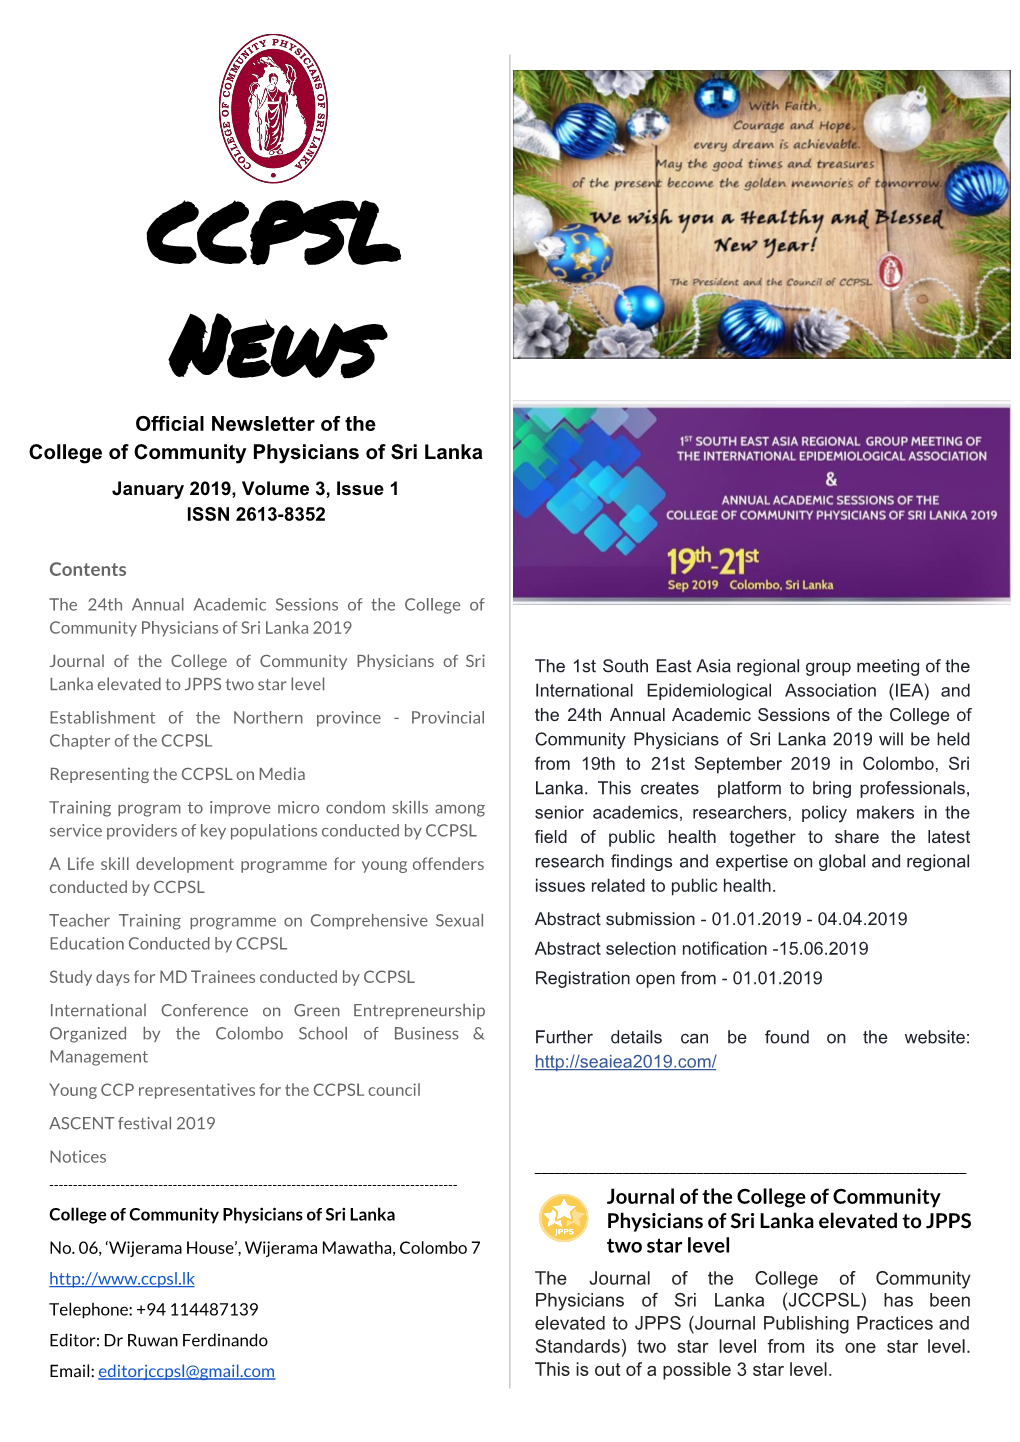 CCPSL News Official Newsletter of the College of Community Physicians of Sri Lanka January 2019, Volume 3, Issue 1 ISSN 2613-8352